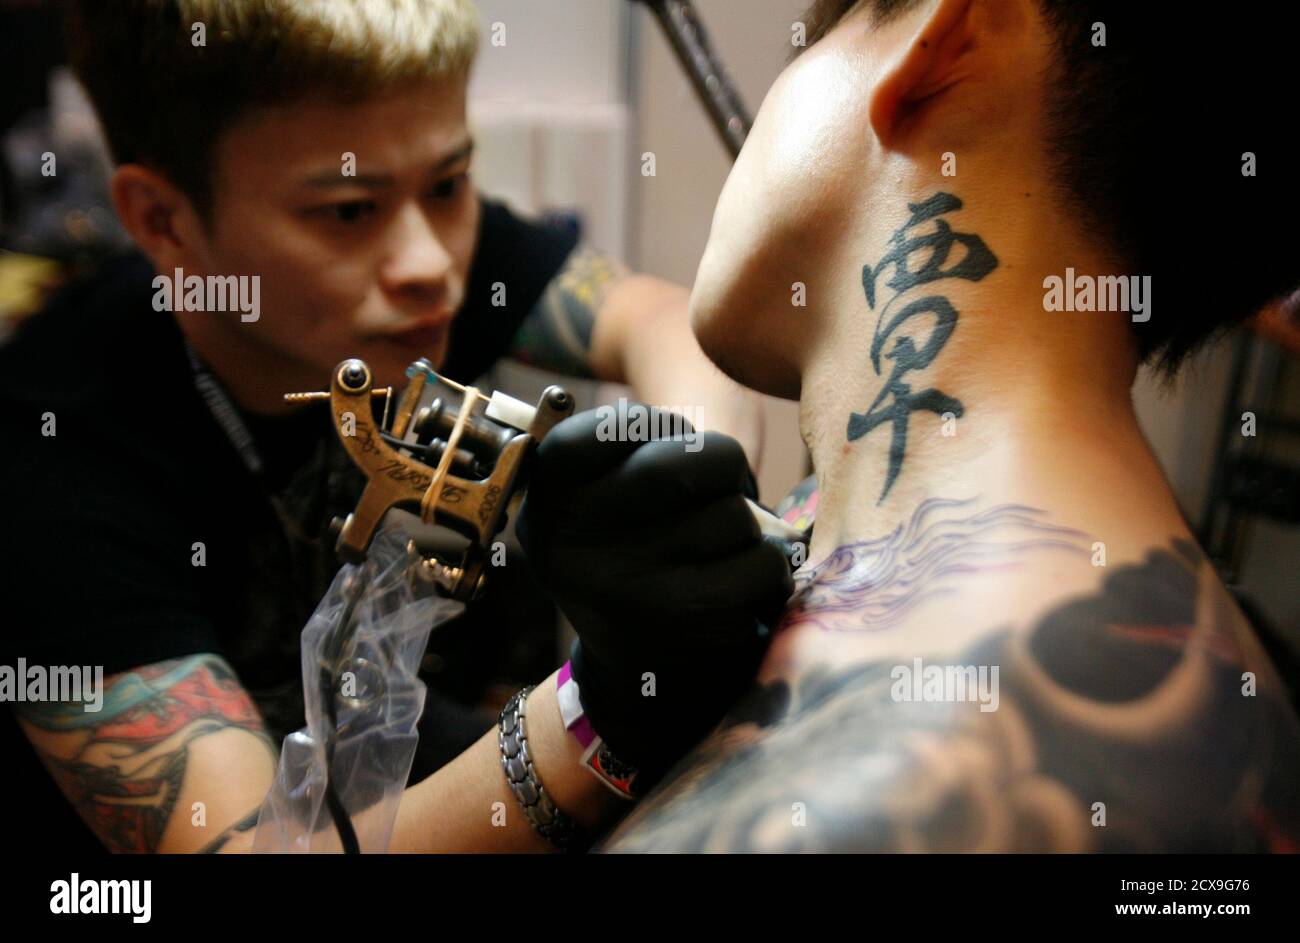 A tattoo artist works on a creation on the body of a festival-goer at the  Tattoo Art and Culture show in Singapore December 11, 2010. The event  brings together like-minded boutique inking